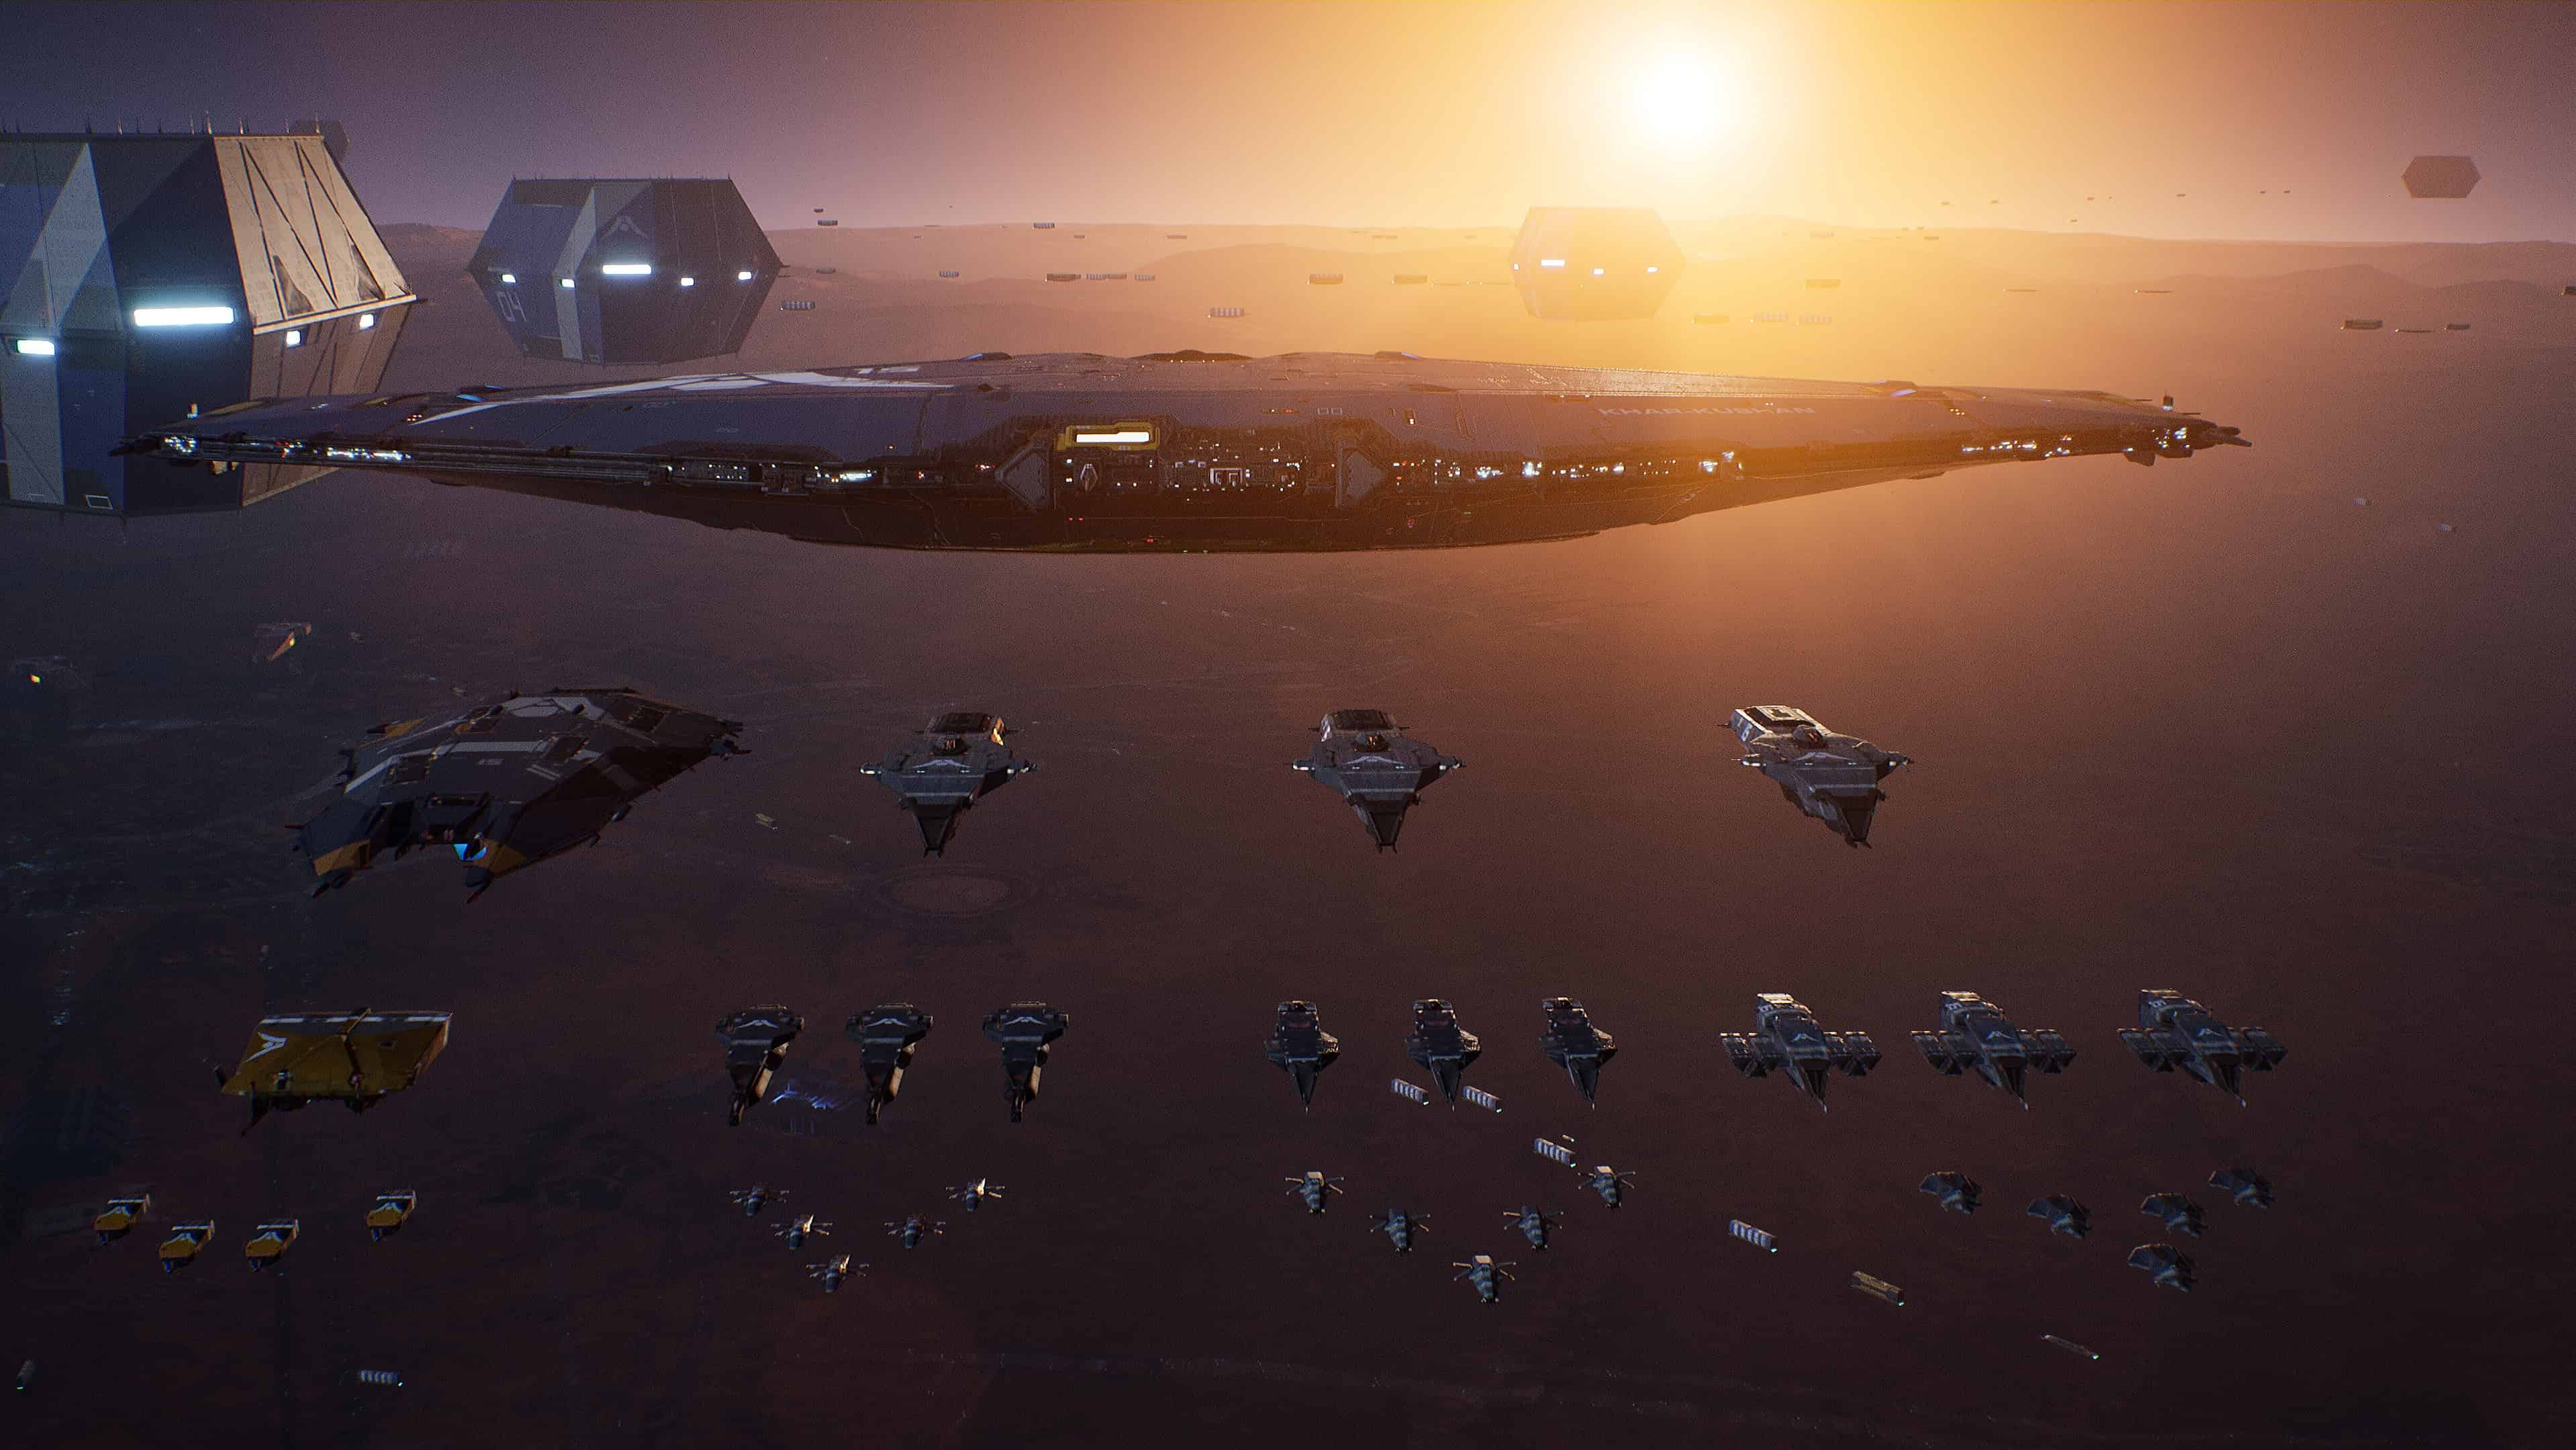 homeworld 3 release date - ships in space organise in formation ready to attack.